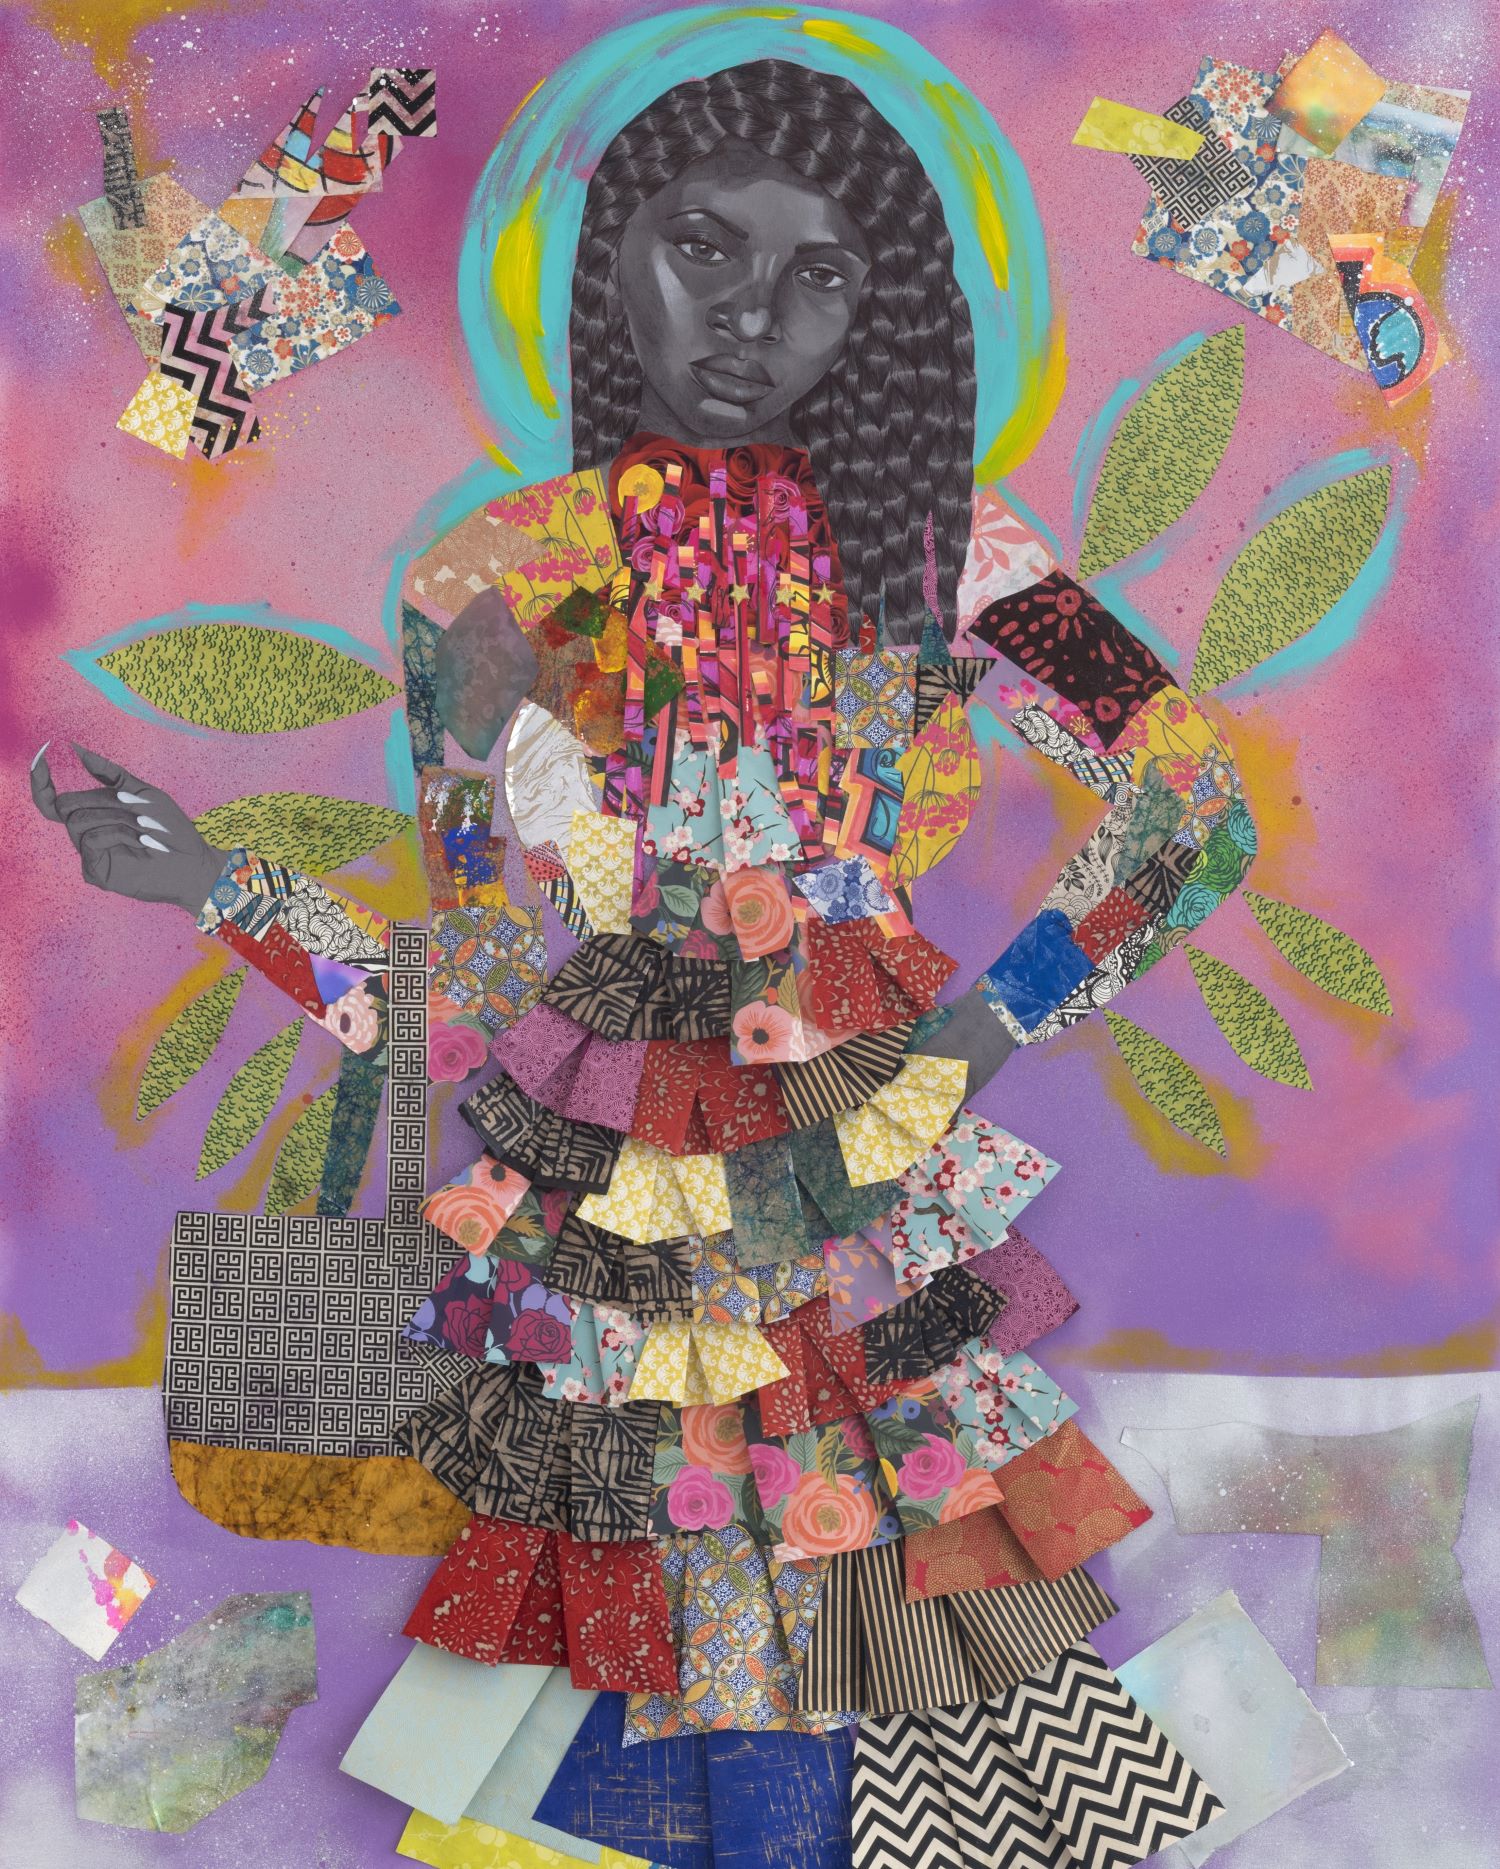 Black woman with long curly black hair with a serious look on her face wearing a colorful dress made of swatches of paper and other materials.